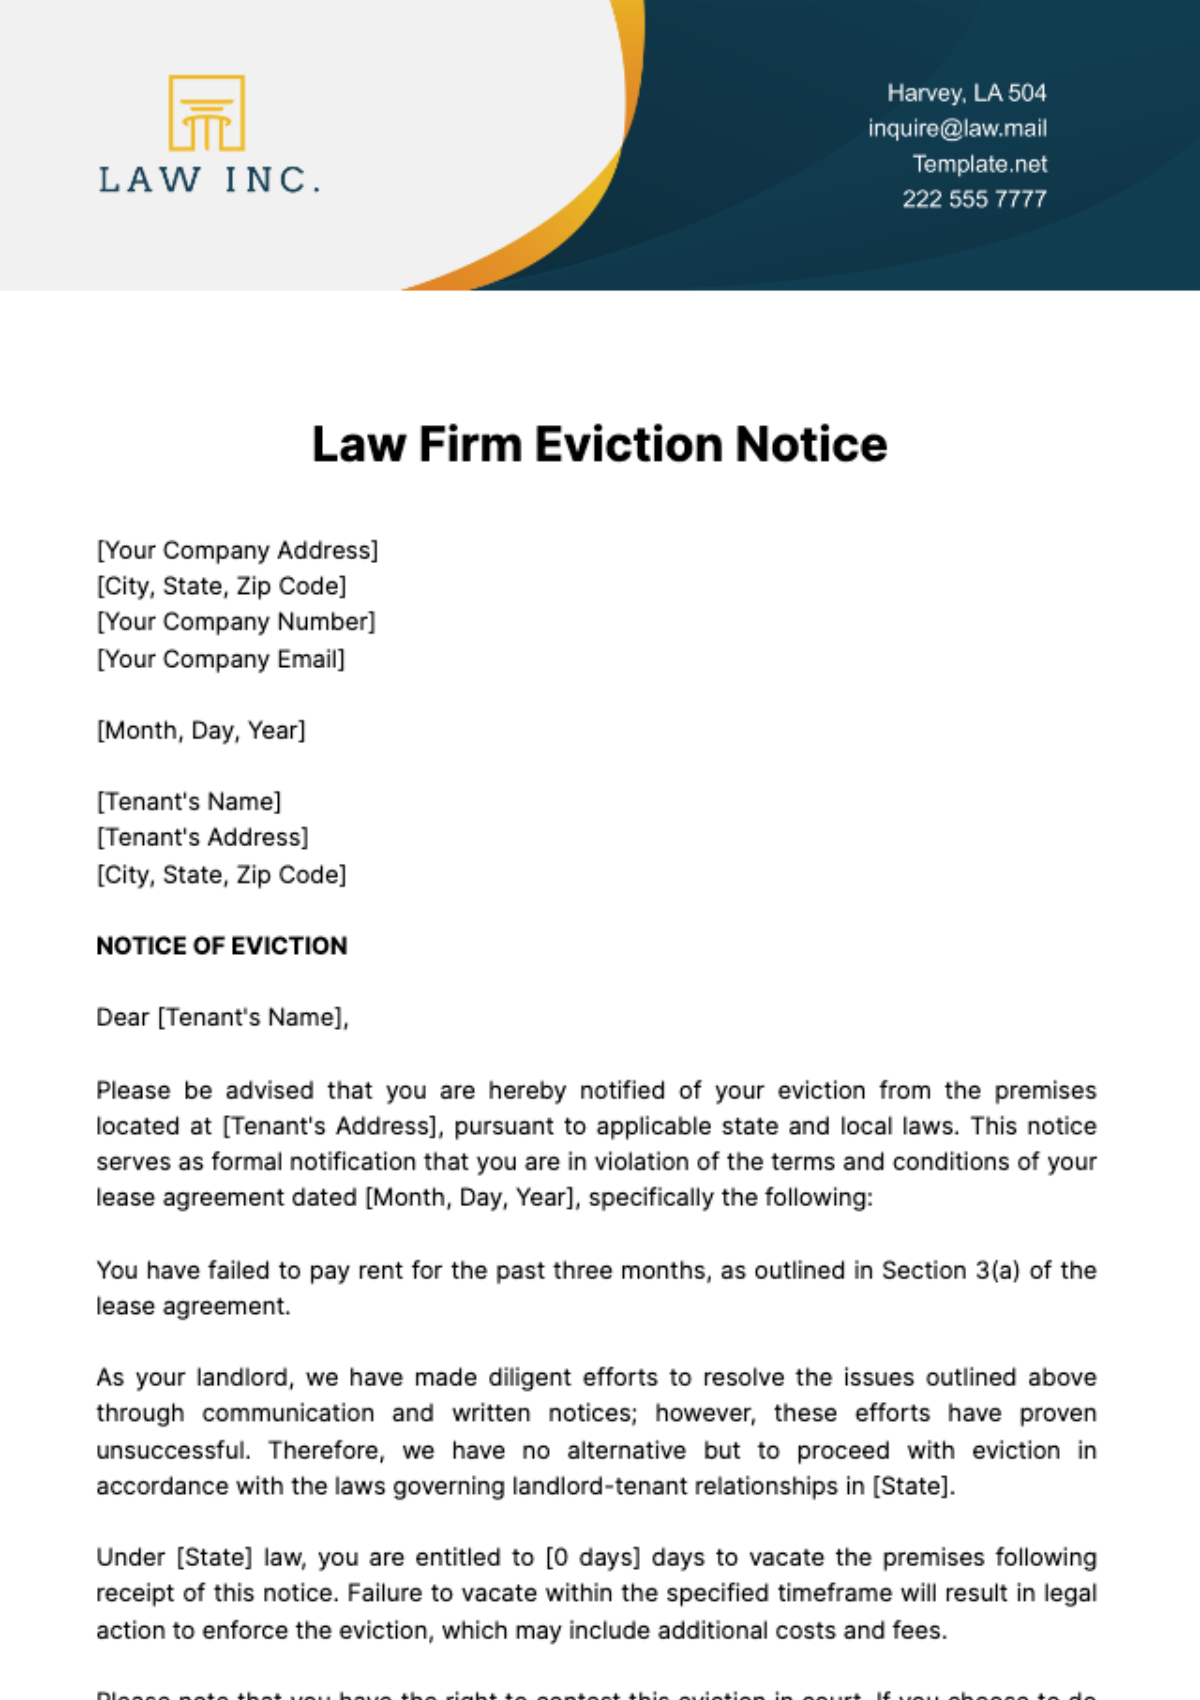 Law Firm Eviction Notice Template